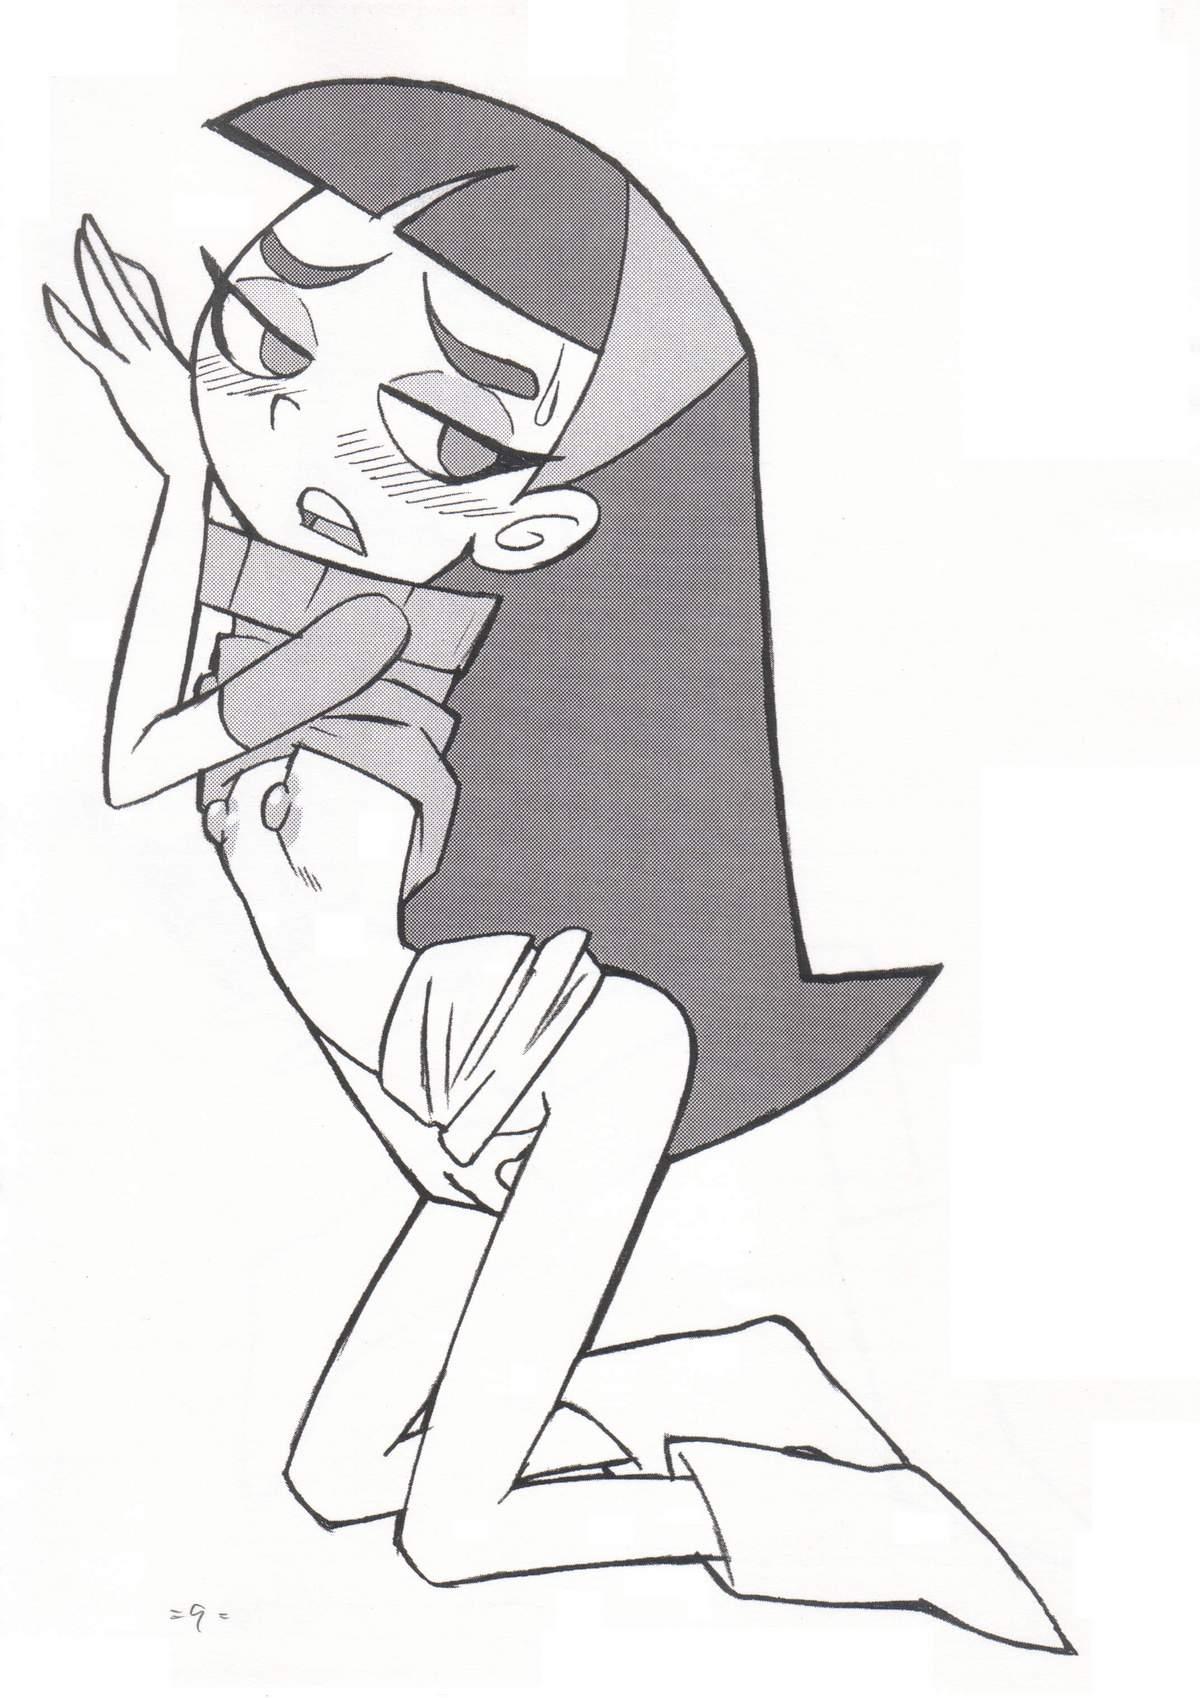 Outdoors Psychosomatic Counterfeit Ex: Trixie - The fairly oddparents Hot Sluts - Page 8